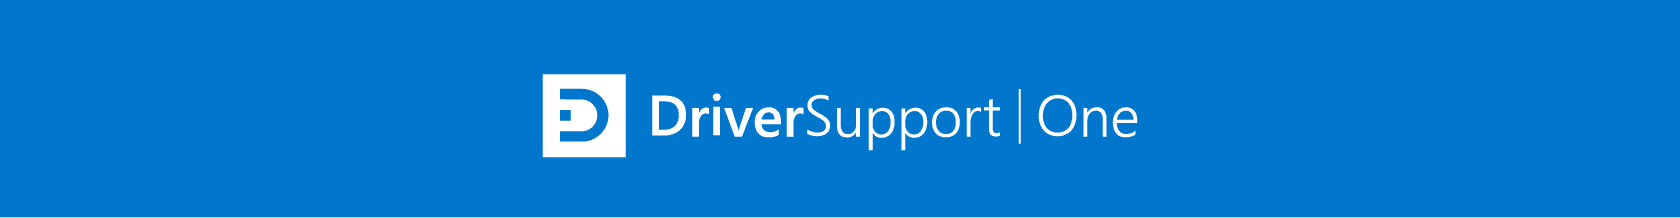 DriverSupport One